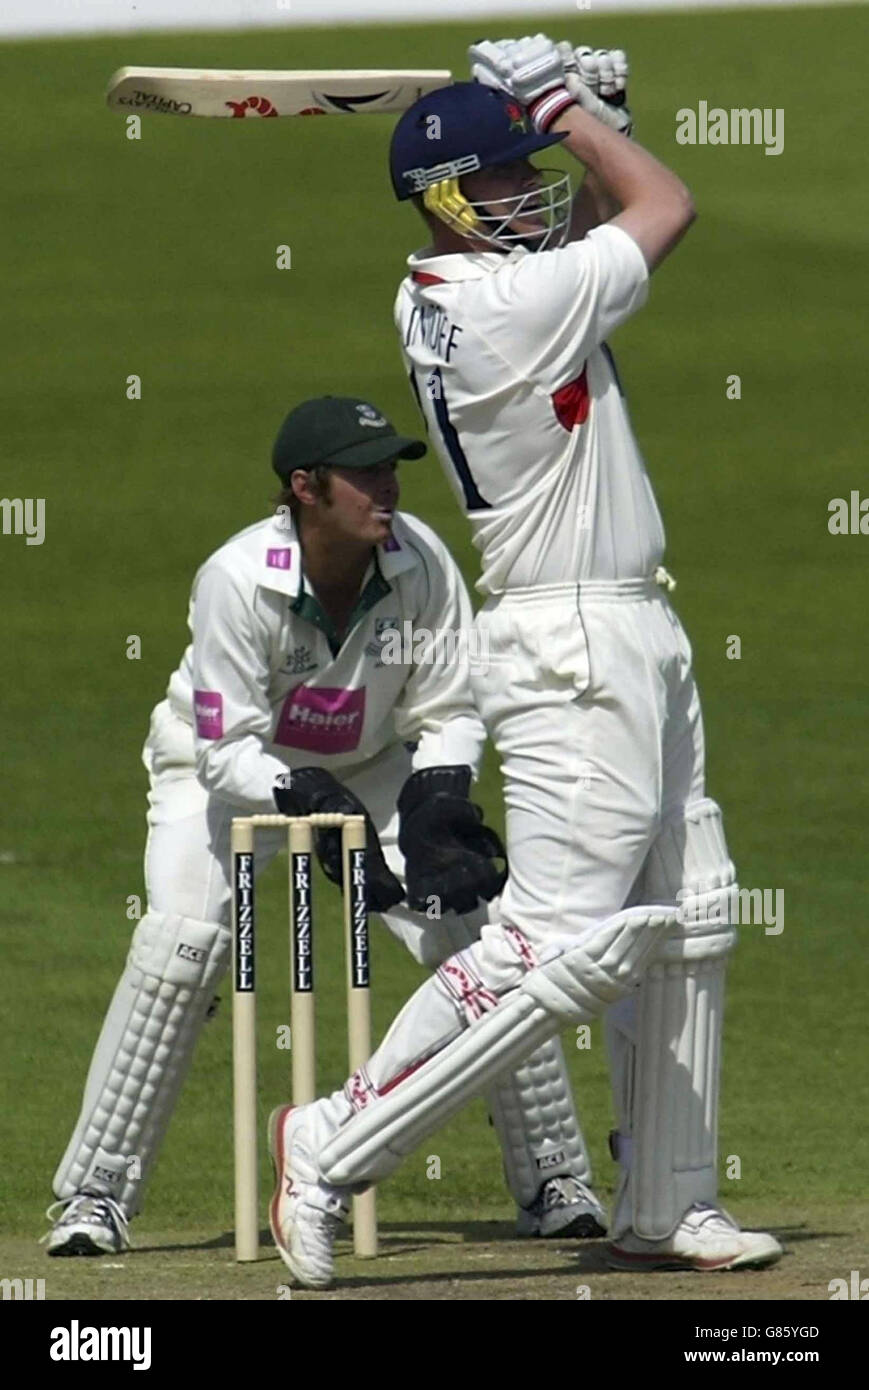 Cricket - Frizzell County Championship Division Two - Worcestershire v Lancashire - New Road. Lancashire's Andrew Flintoff hits a 6 off the bowling of Worcestershire's Gareth Batty. Stock Photo